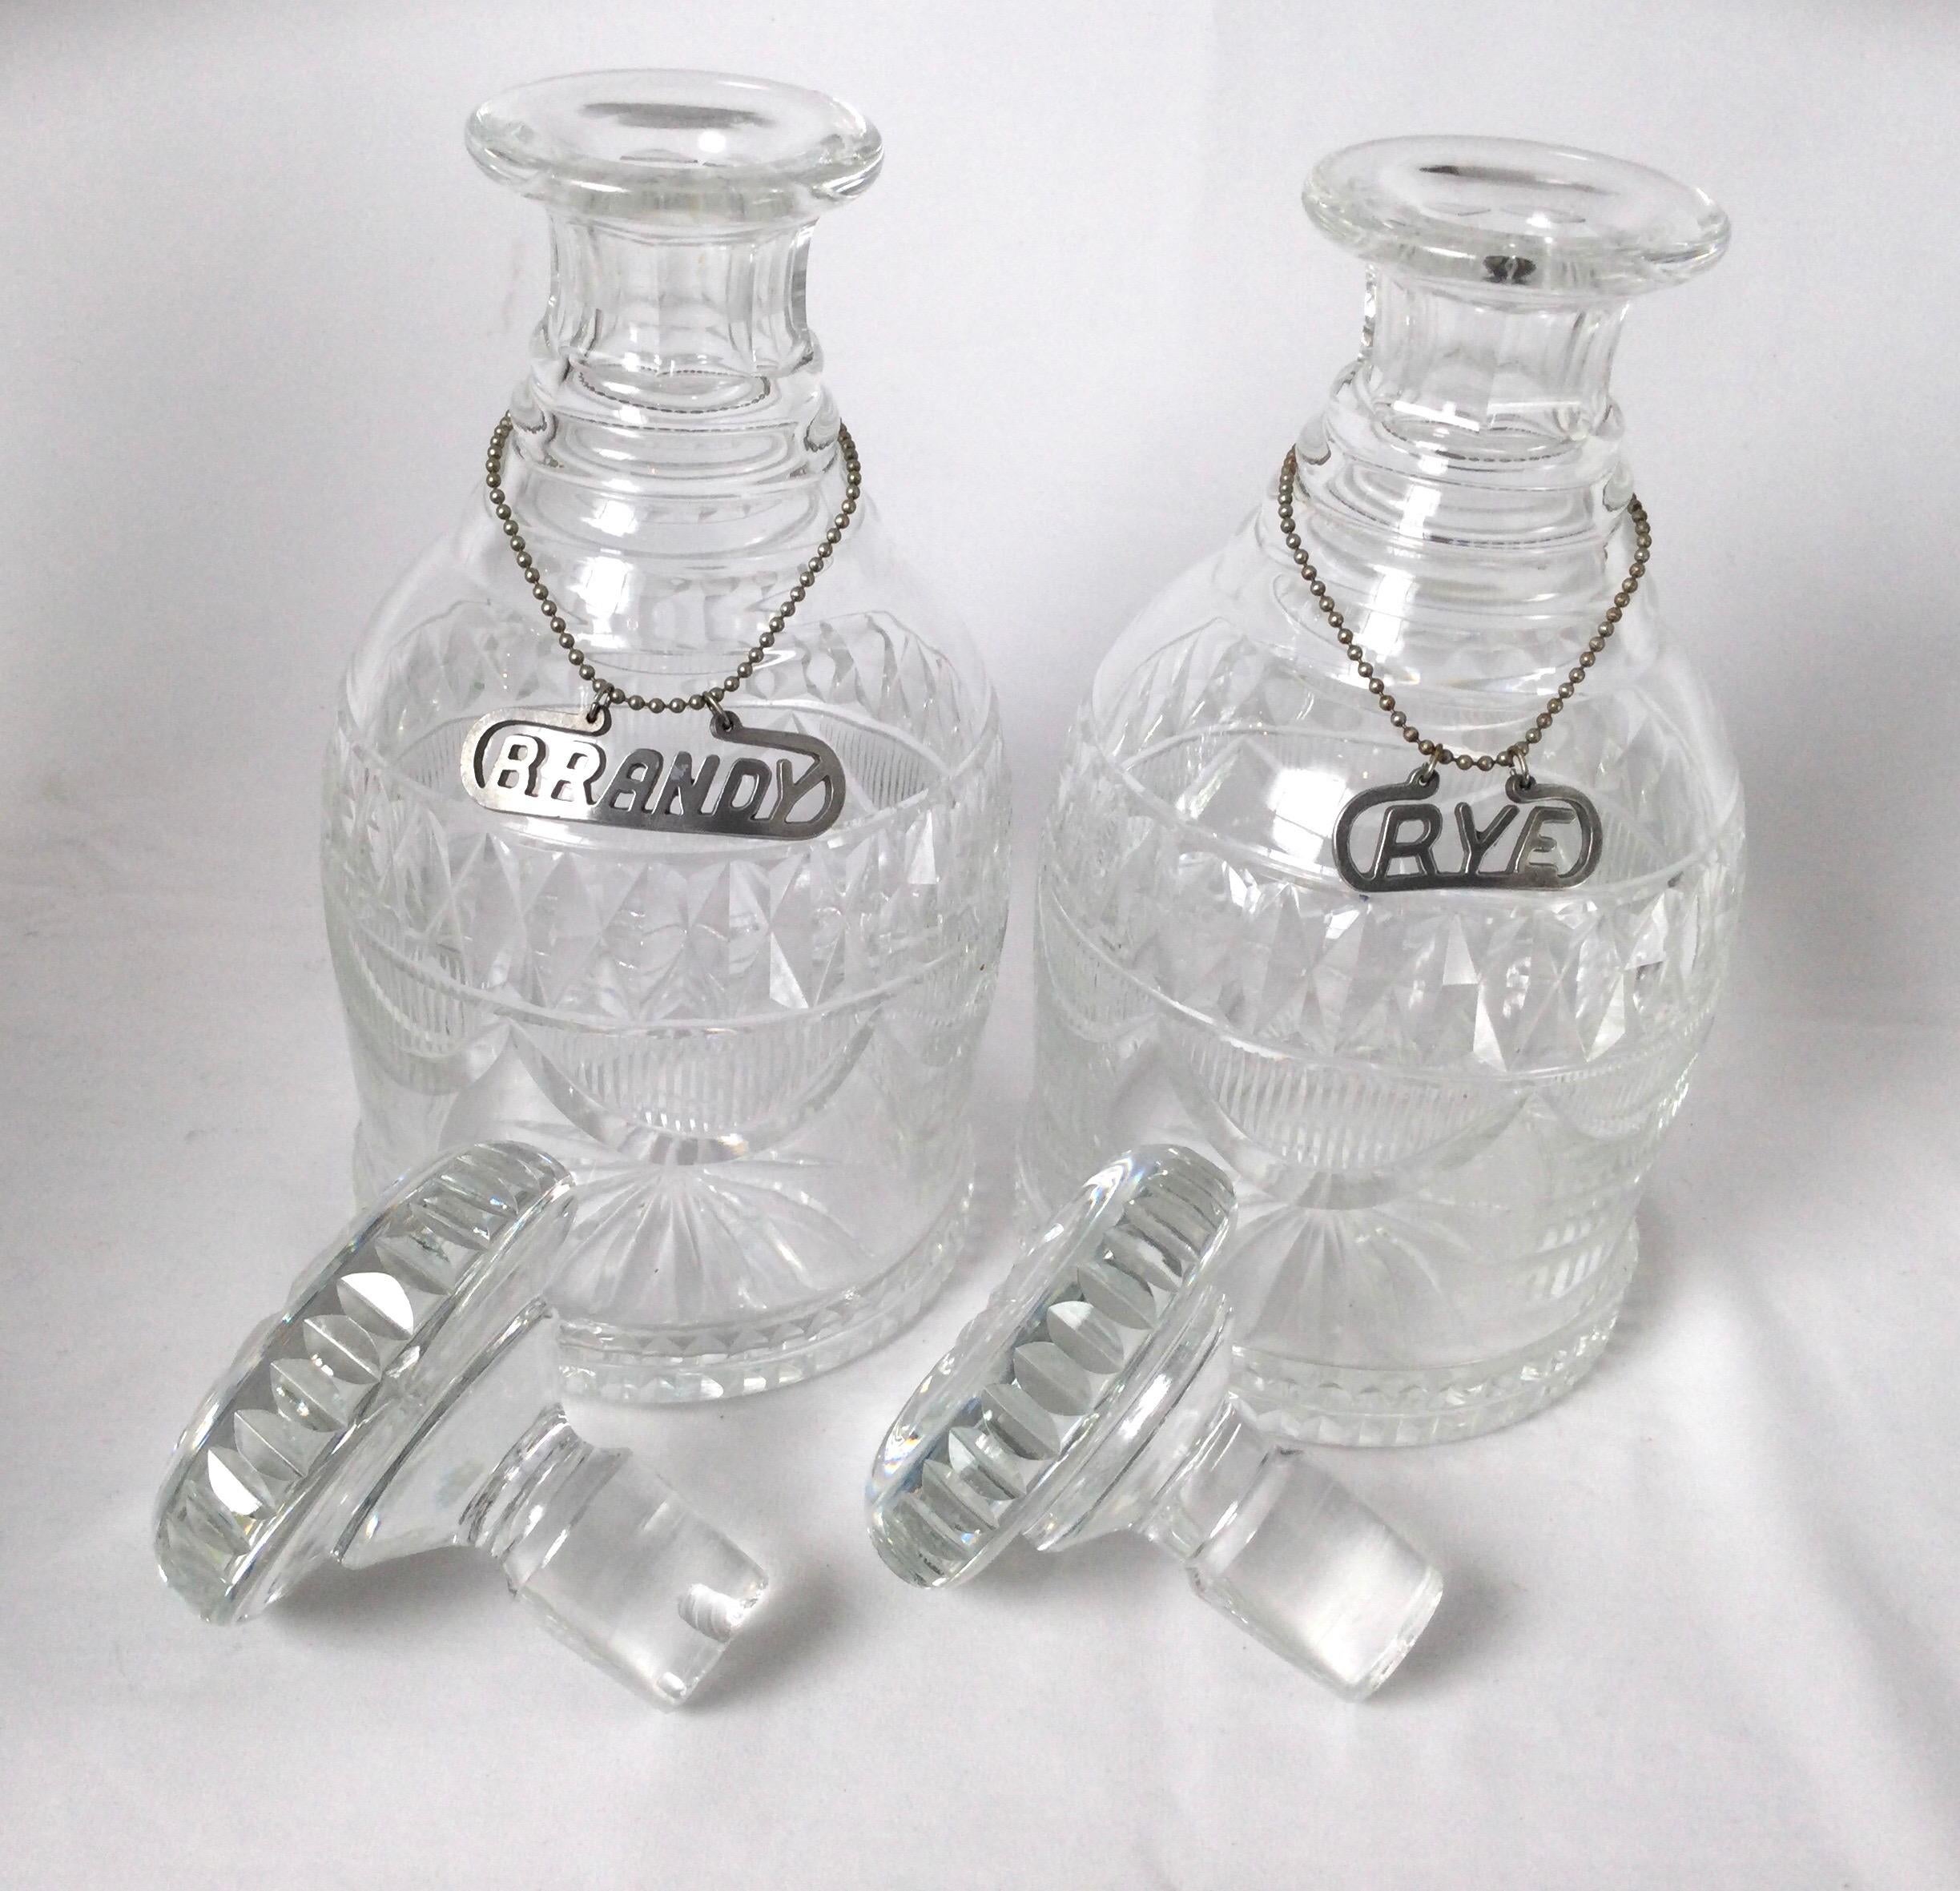 English Pair of Georgian Style Liquor Decanters For Sale